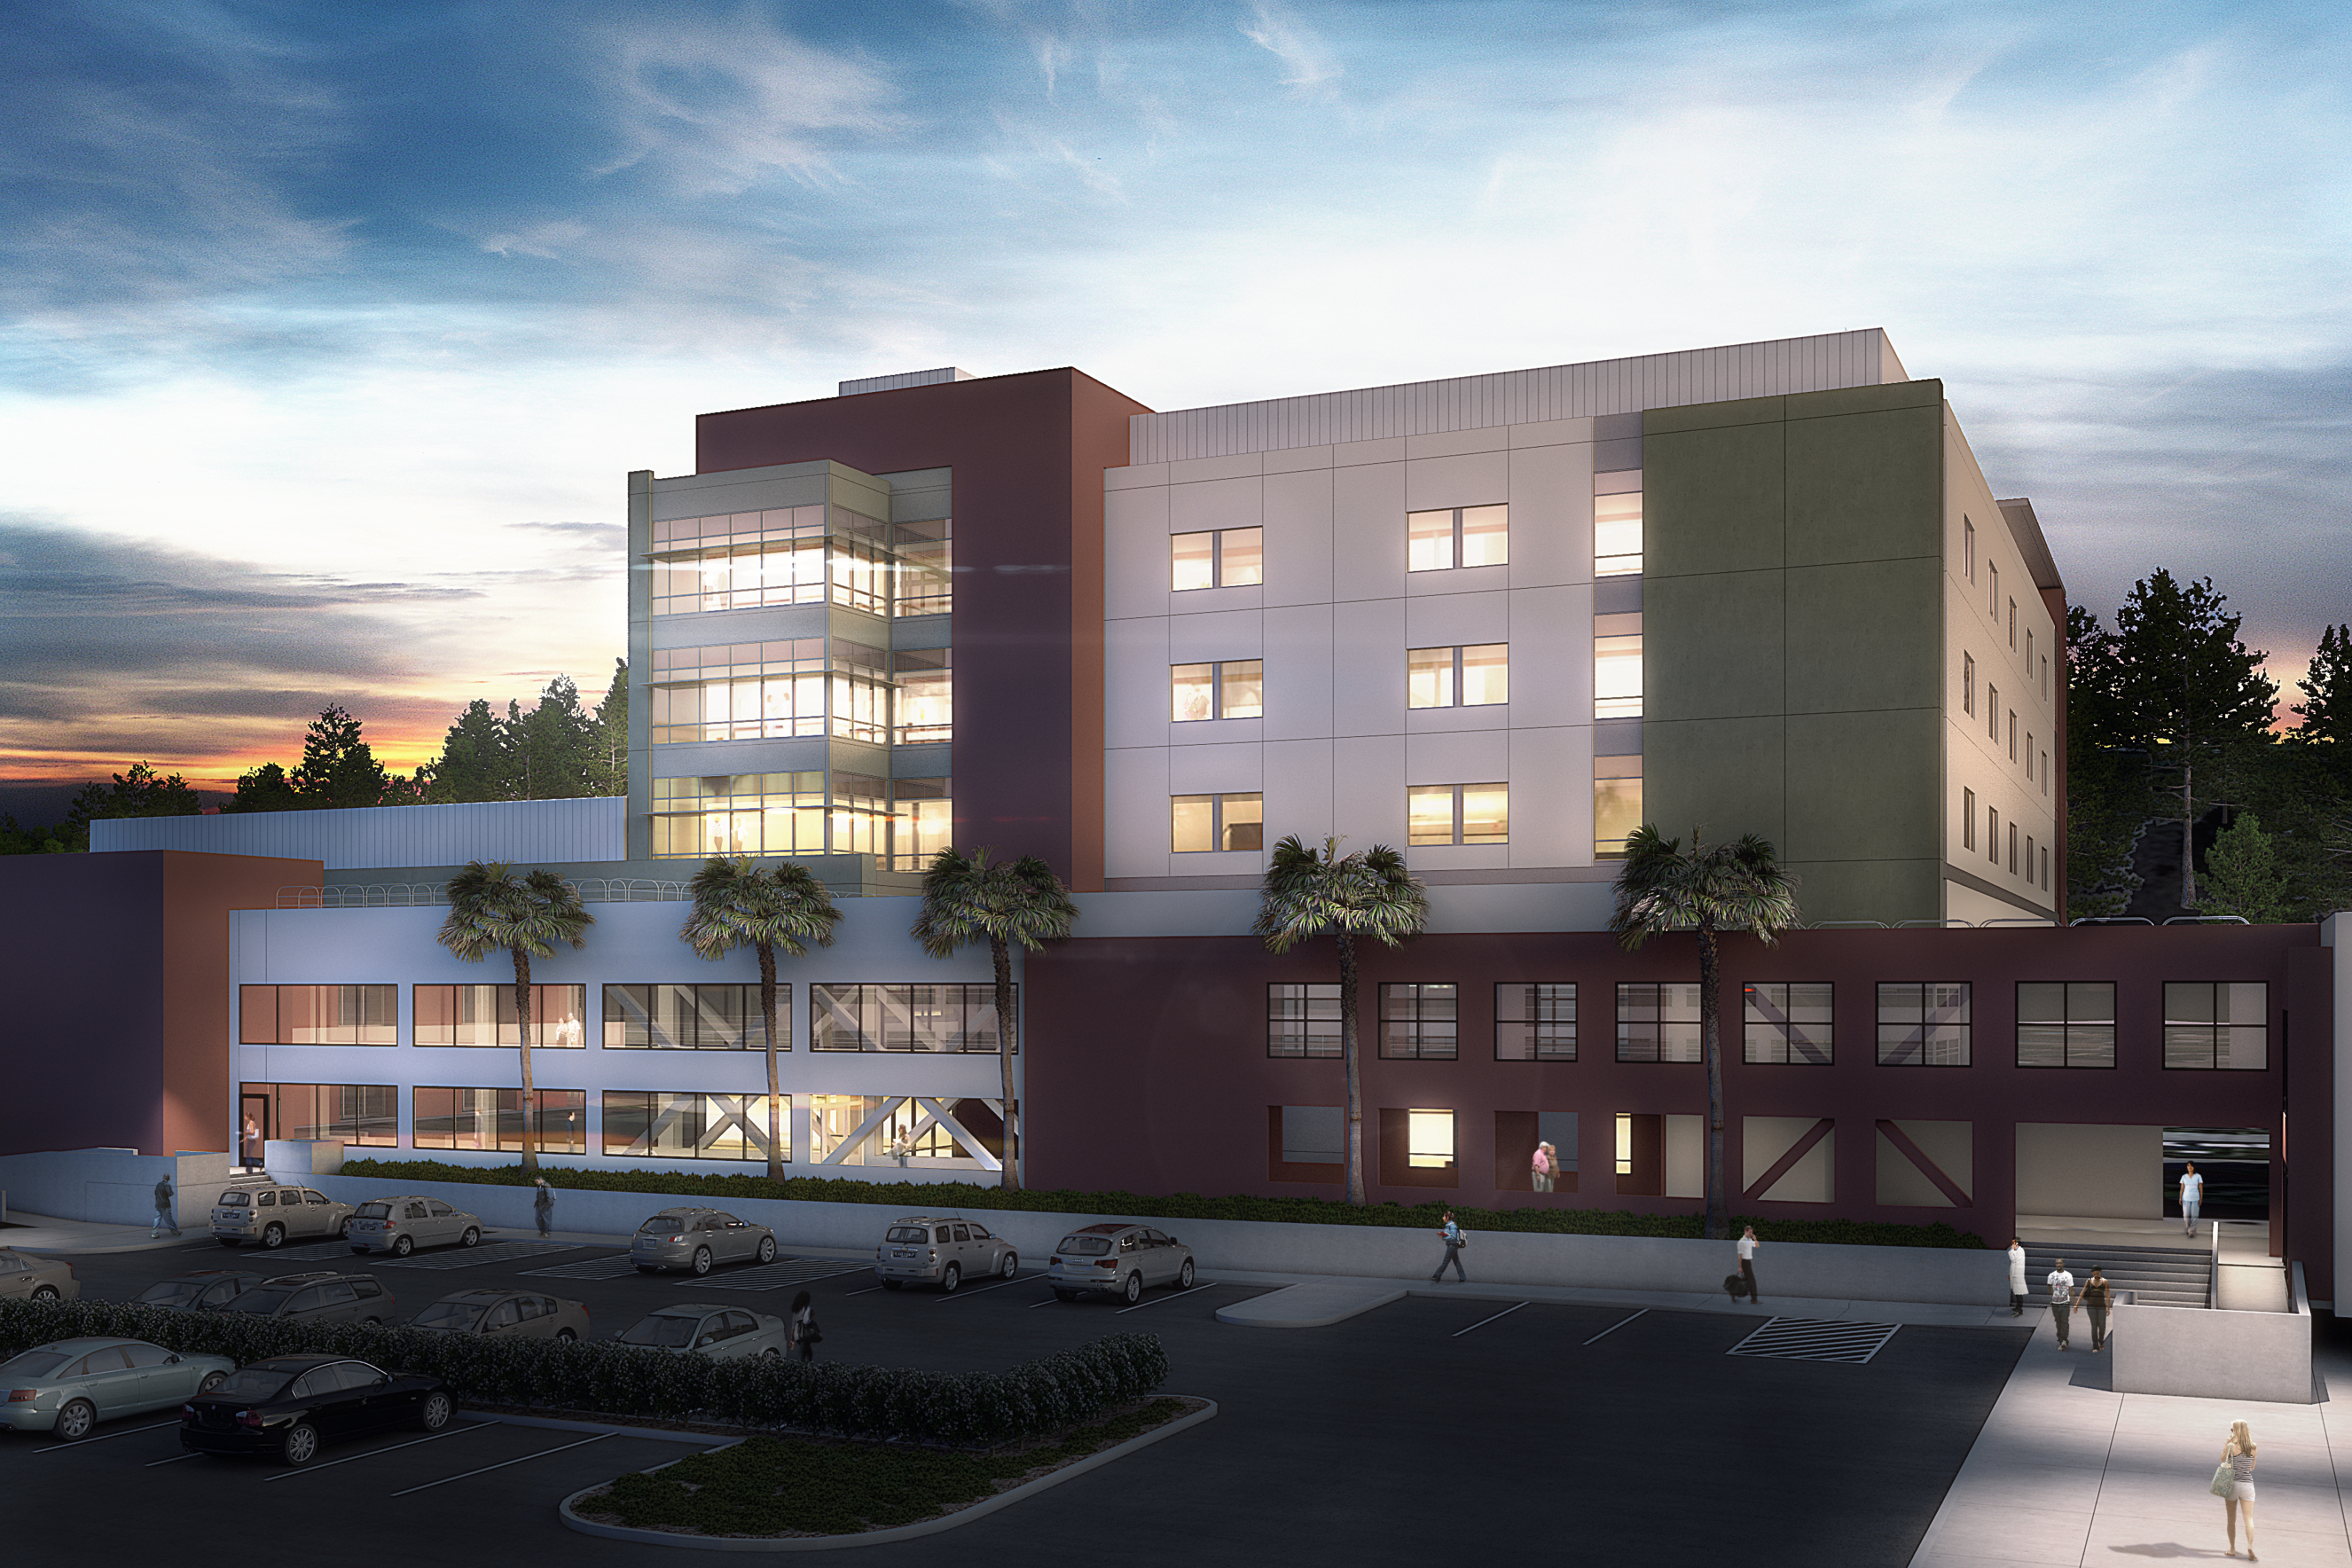 For the Henry Mayo Newhall Hospital Patient Tower project, the design-build architecture approach was used.